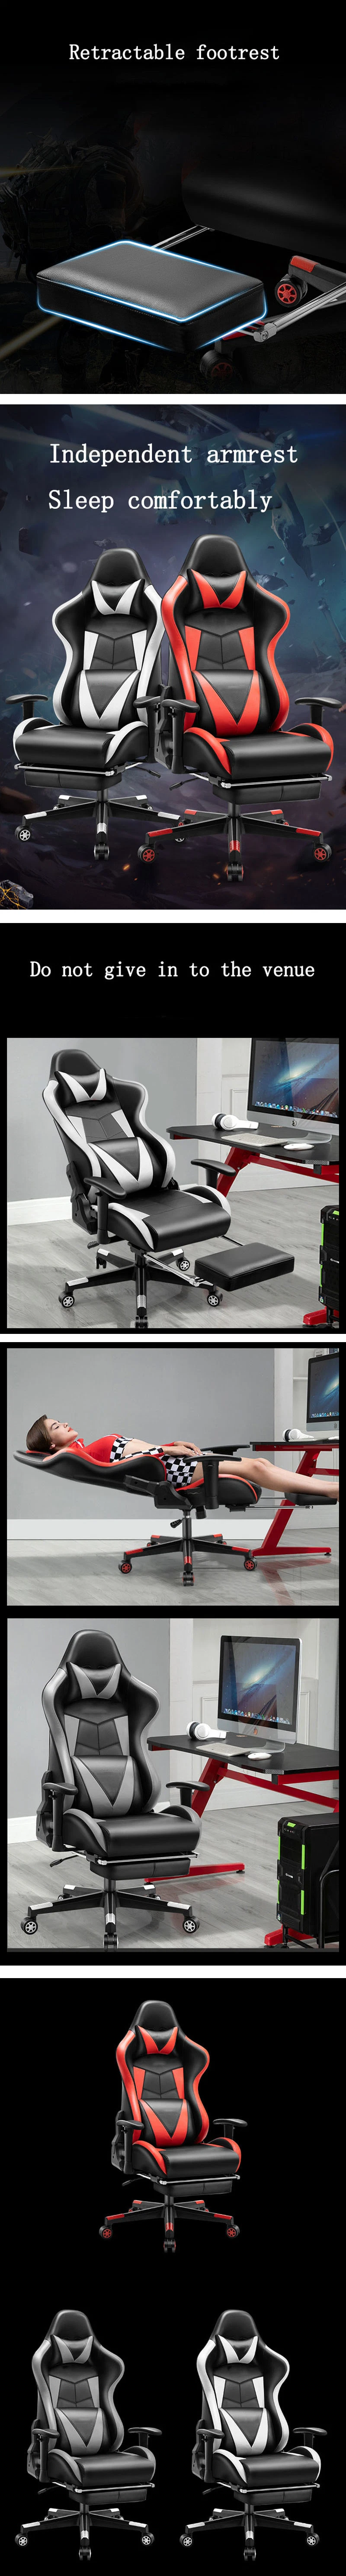 Modern Adjustable Armrest Racing Chair White Office Computer Gamimg Chair with Headrest